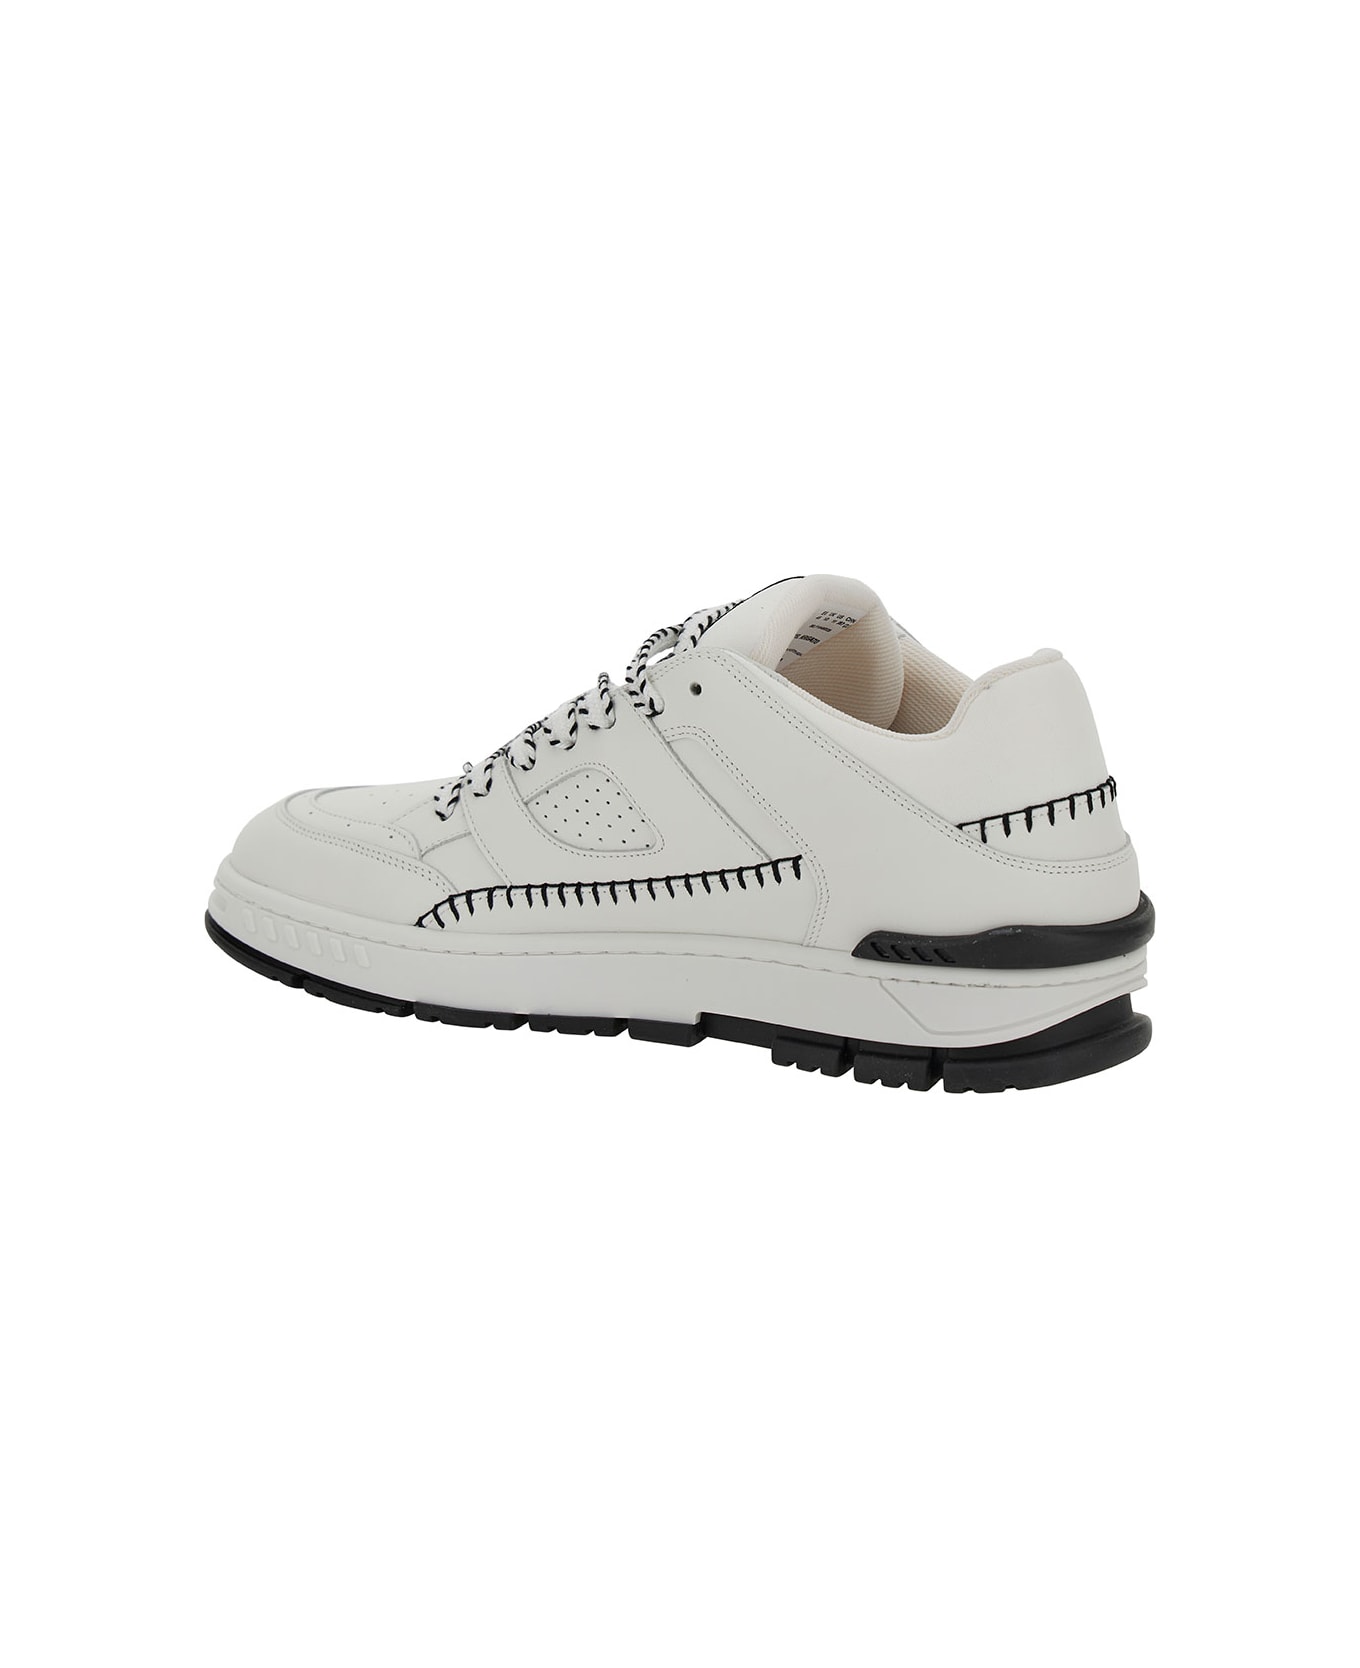 Axel Arigato 'area Lo Sneaker Stitch' White Low Top Sneakers With Contrasting Stitch Detail In Leather Man - White Black スニーカー